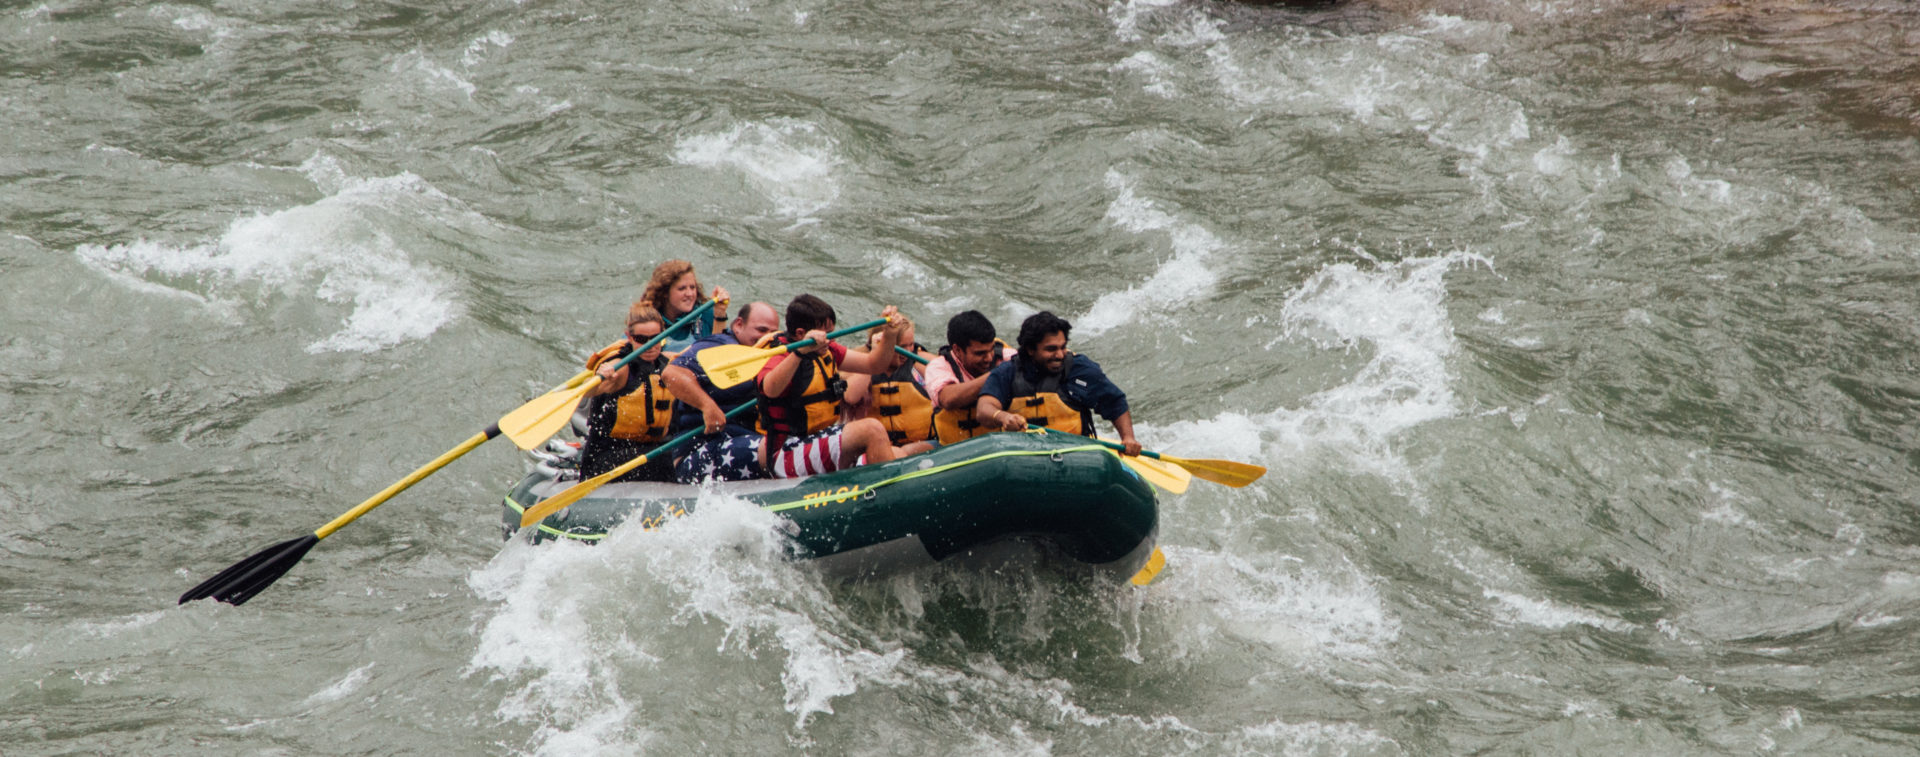 A group in a raft rides a rapid during a Jackson Hole Whitewater rafting trip